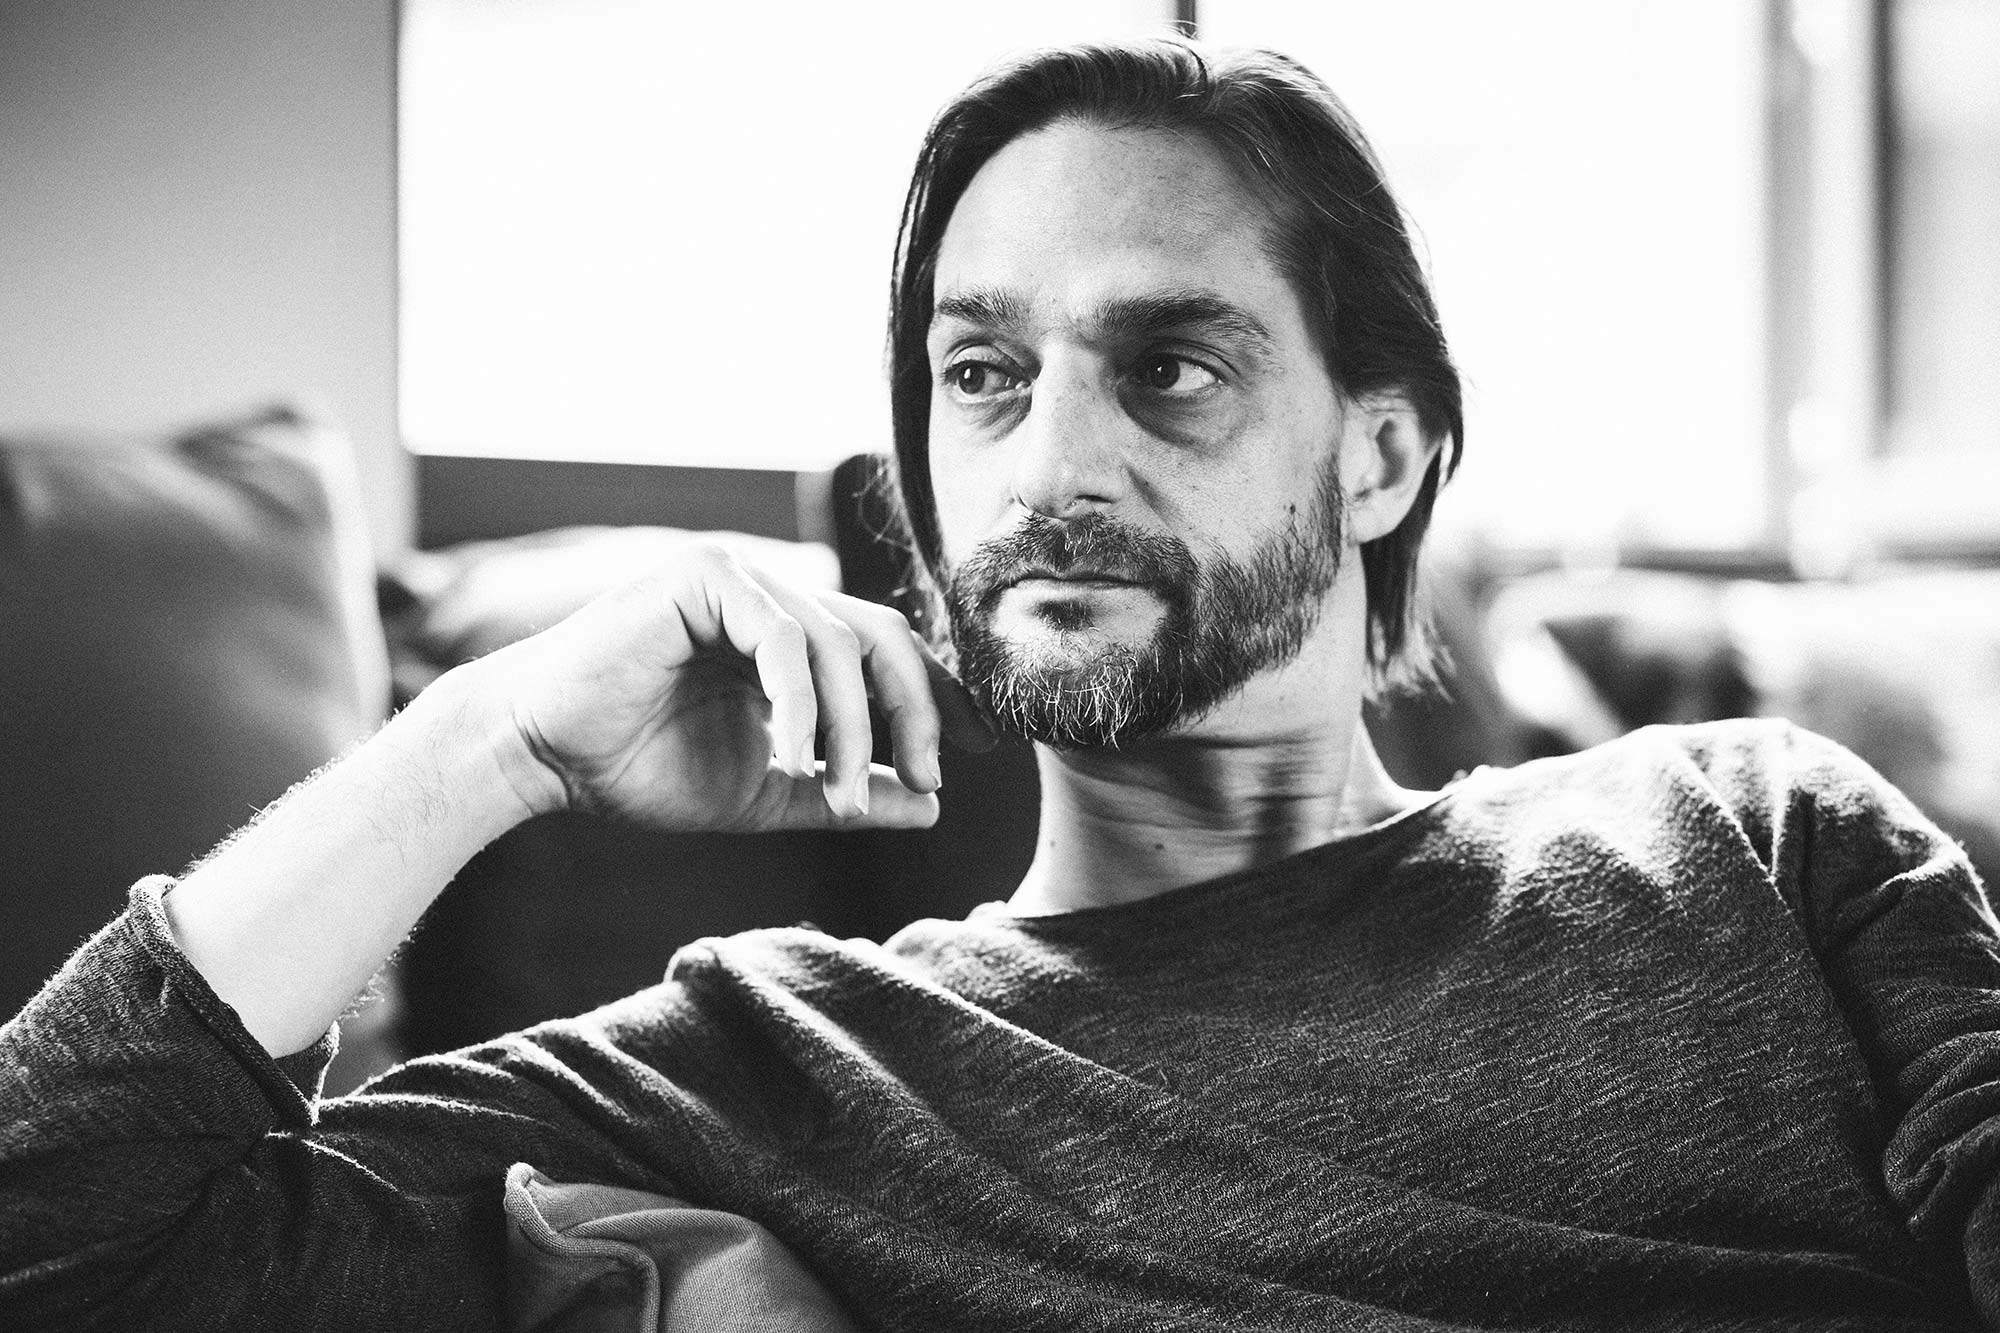 Ricardo Villalobos, Alci contribute to new The Other Side compilation for Beirut image